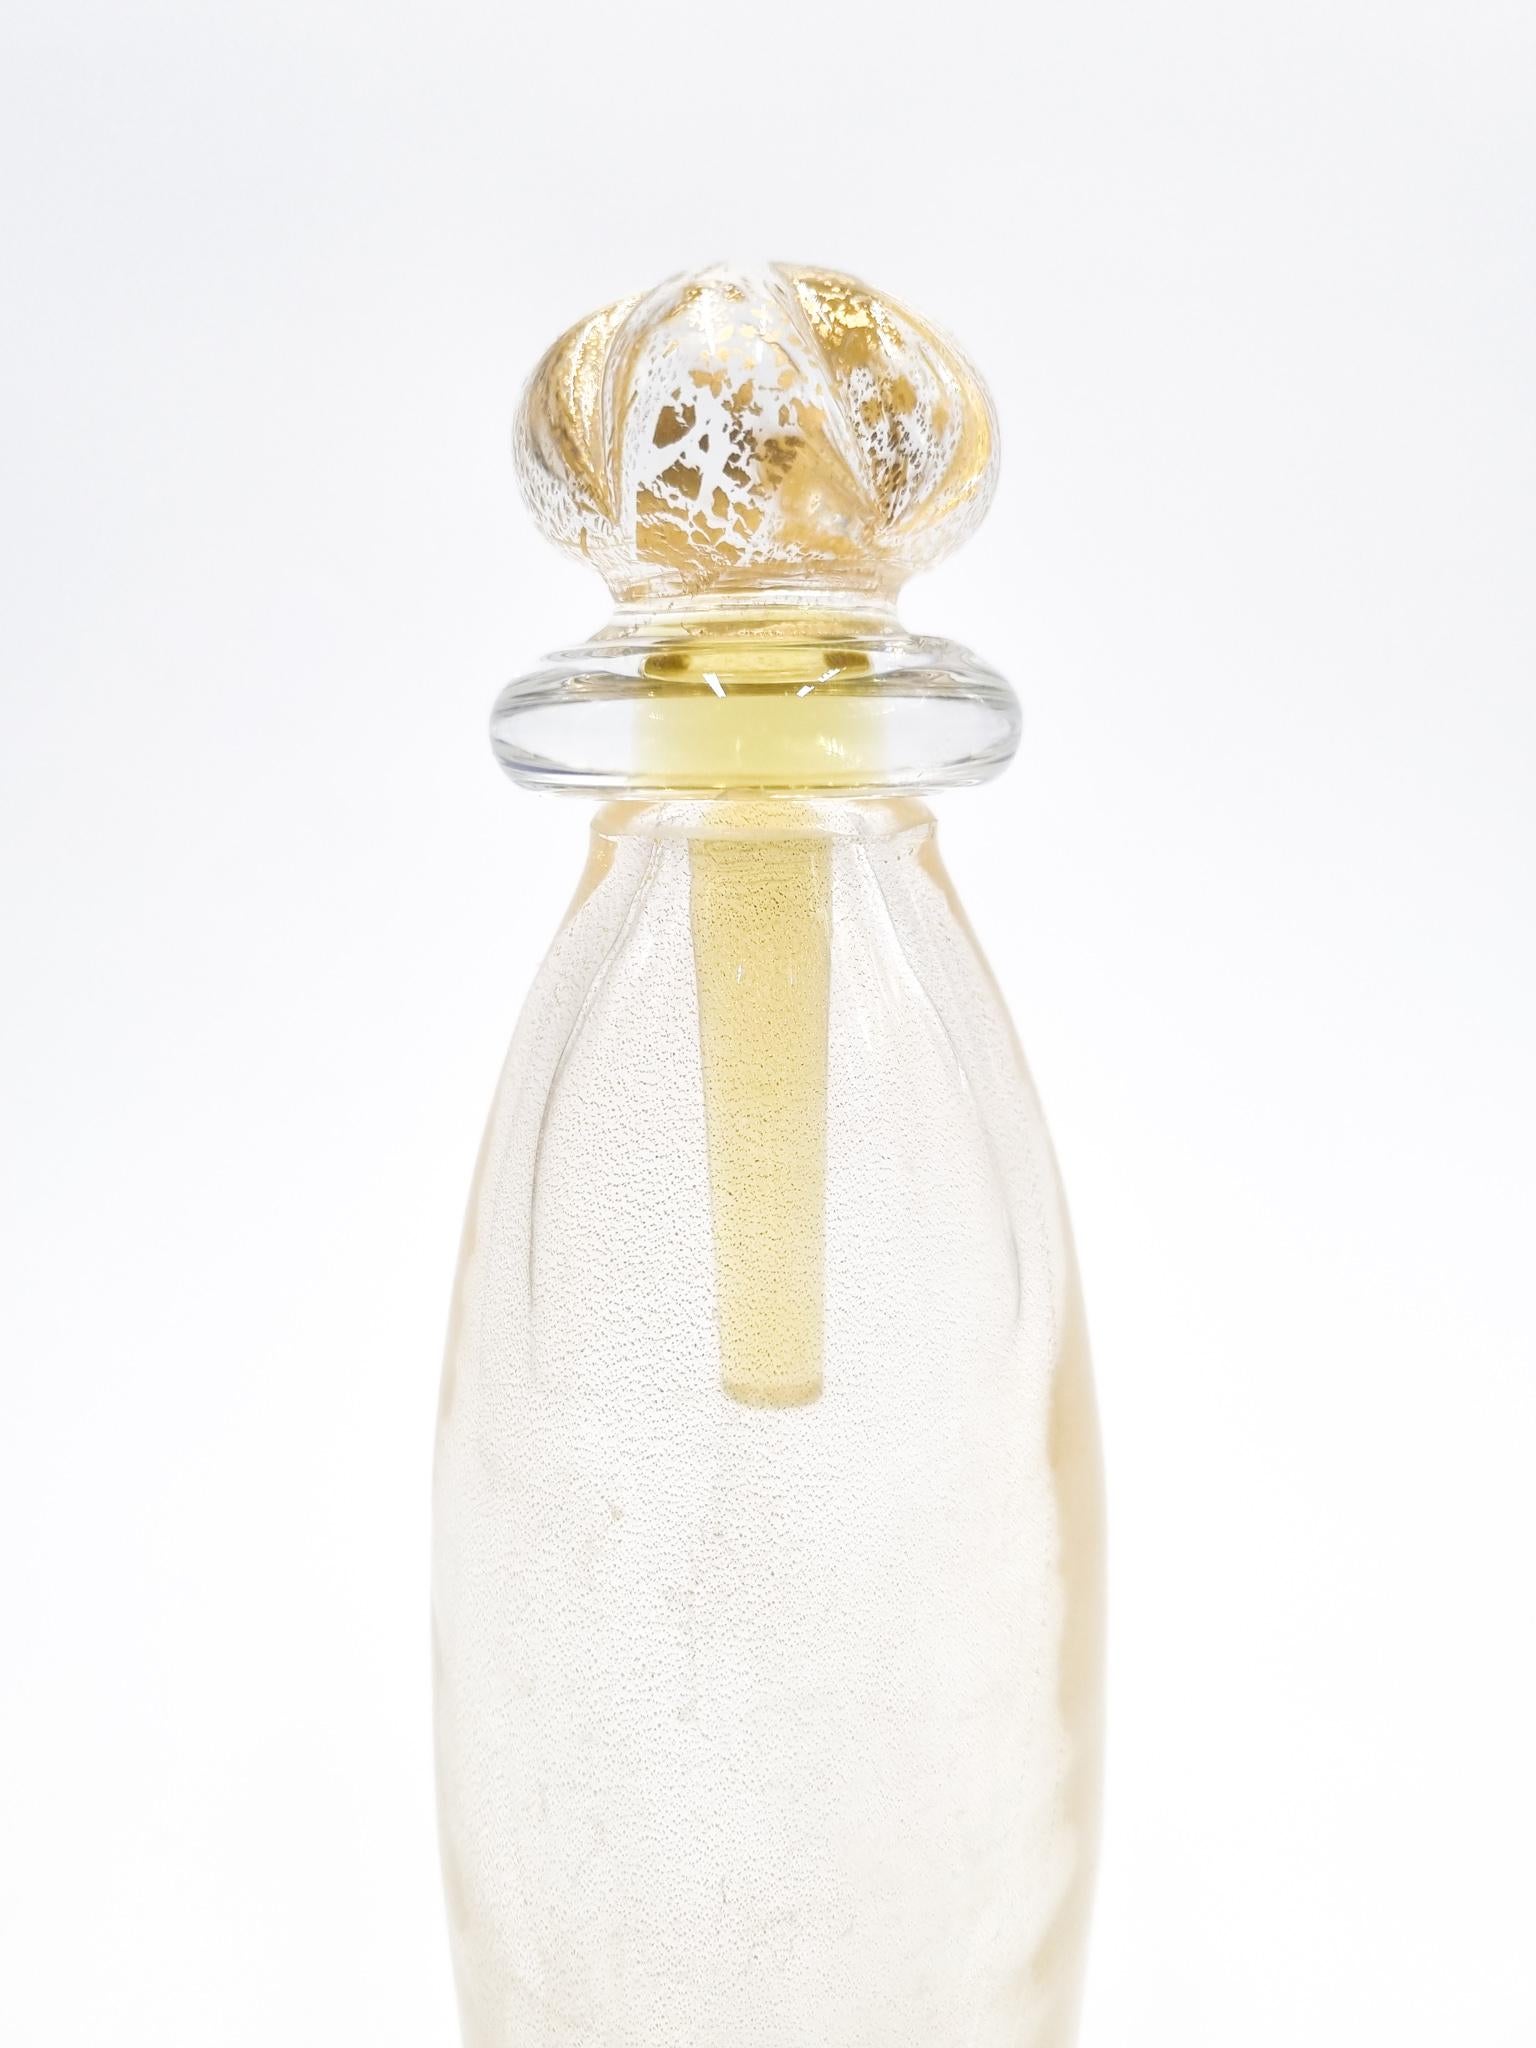 Murano glass bottle with gold inserts, made by Carlo Moretti in the 70s.

Measures: Ø cm 5, H cm 23

Carlo Nason, born in Murano in 1935 from one of the oldest glassmaking families on the island, he was a great master glassmaker. He grew up